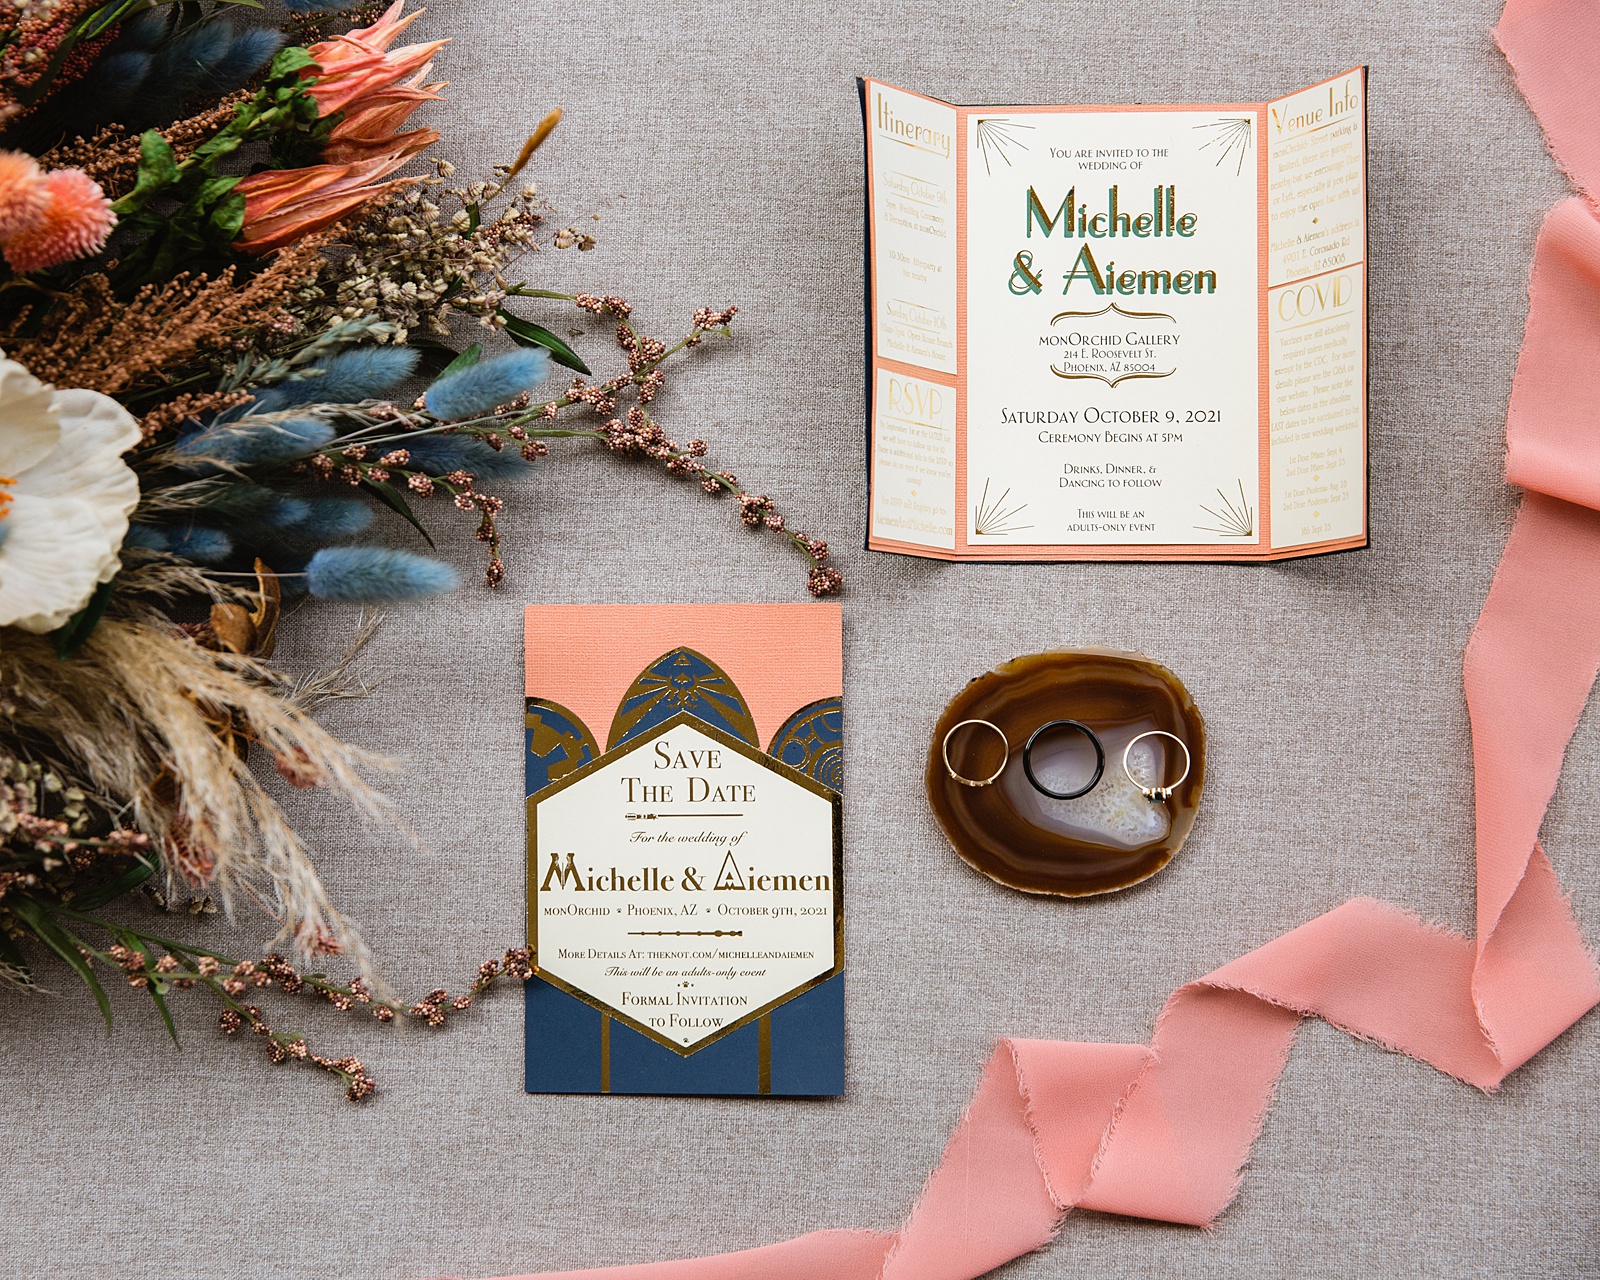 Art deco inspired peach and navy wedding invitations with a dried floral wedding bouquet and rings by Phoenix wedding photographer PMA Photography.